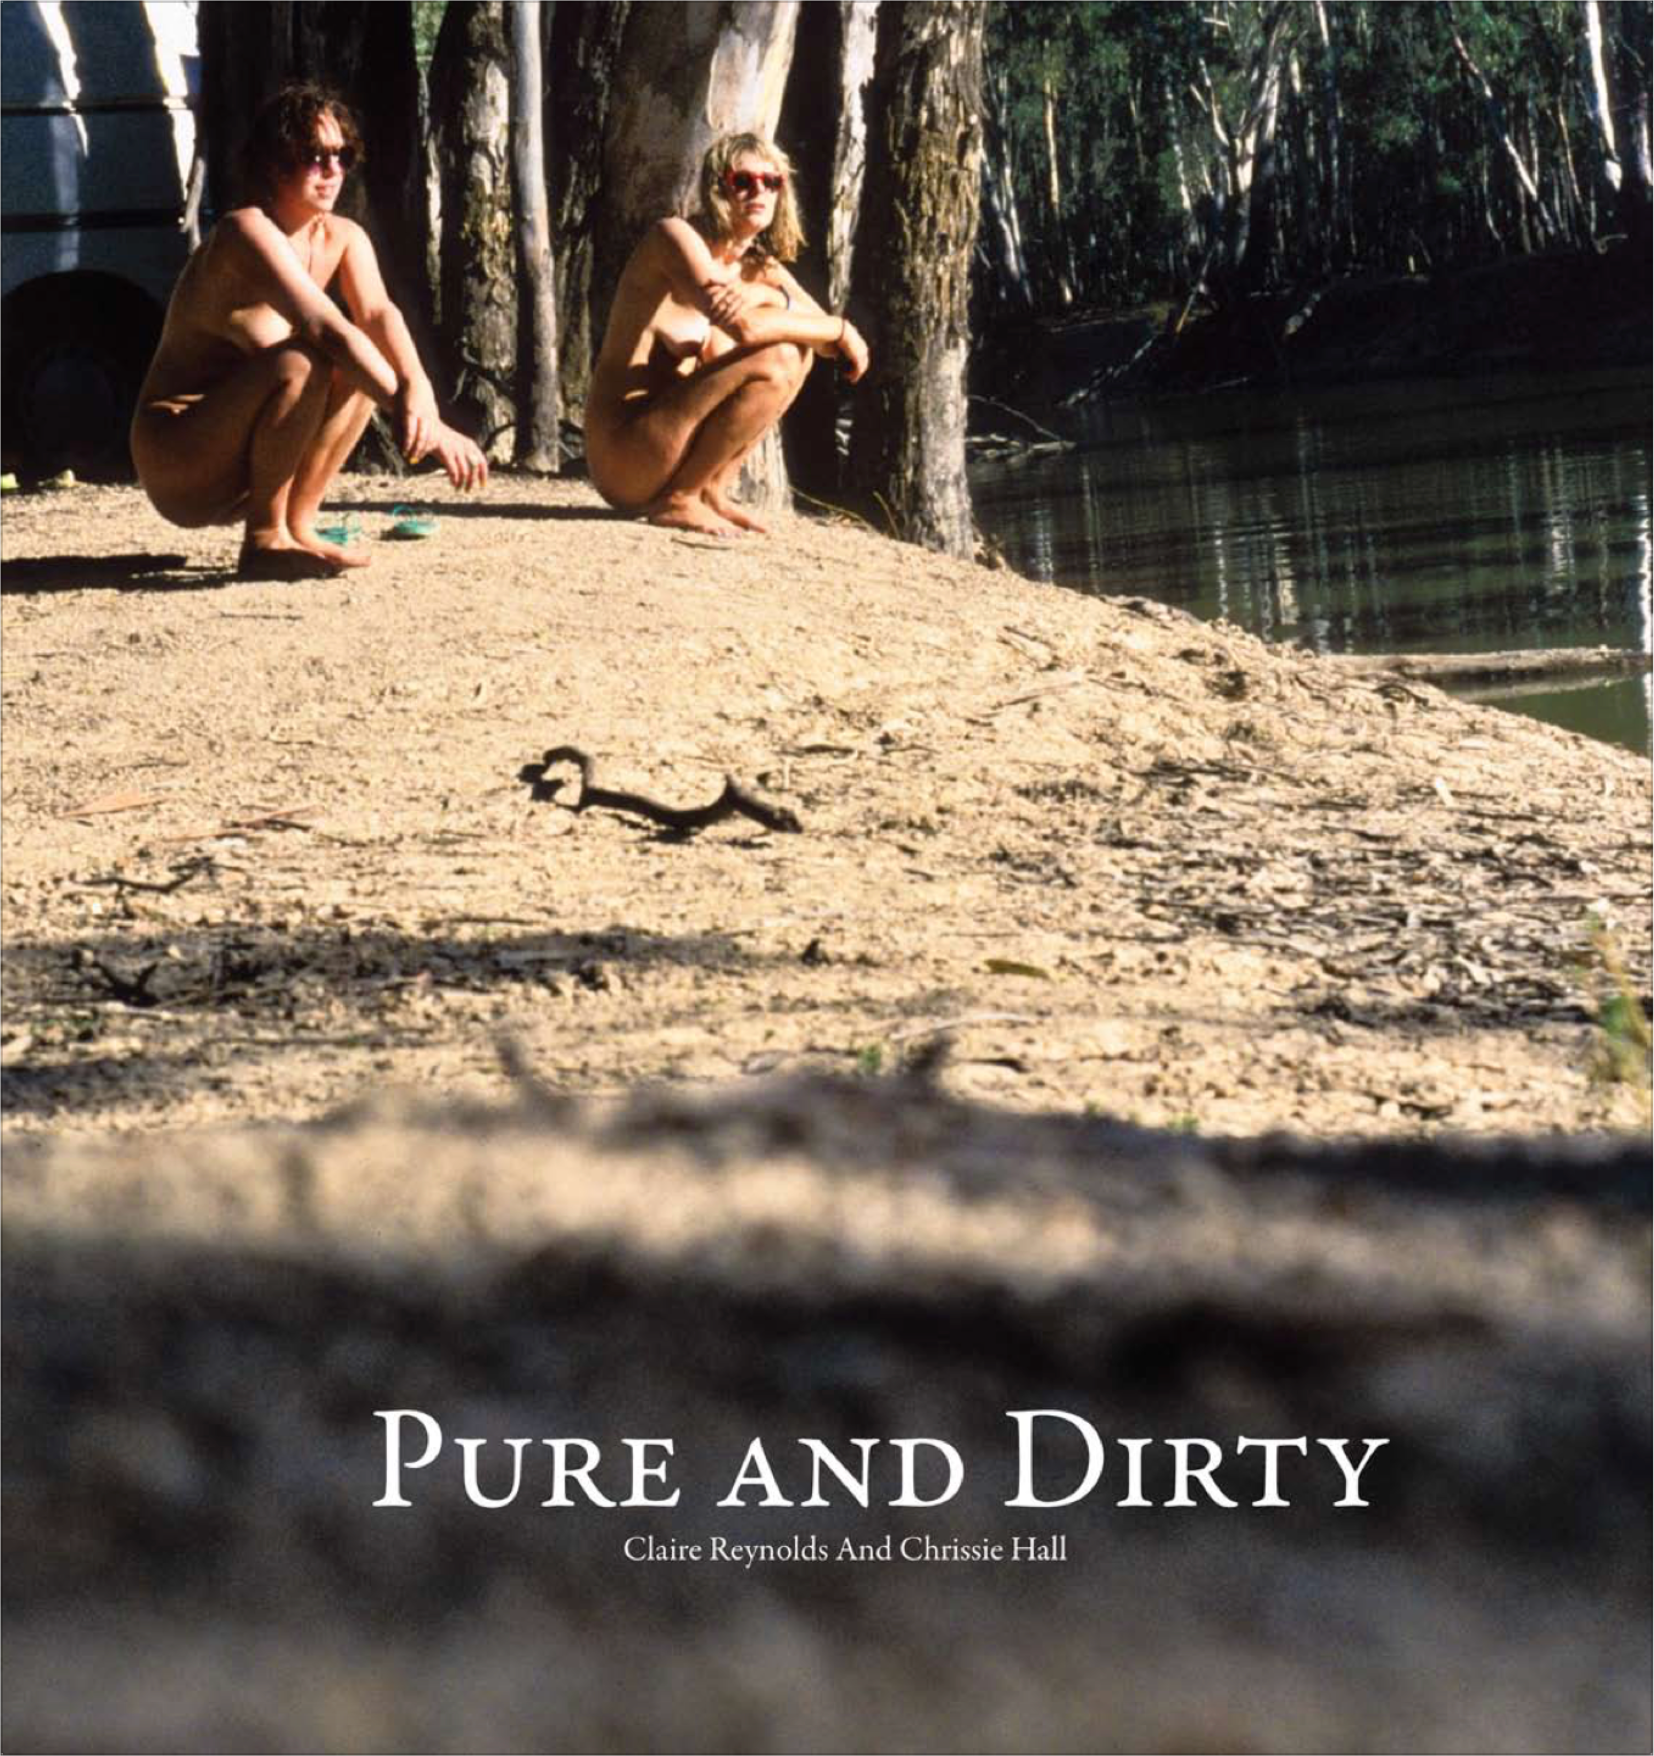 Pure and Dirty "The Book" Special Limited Edition